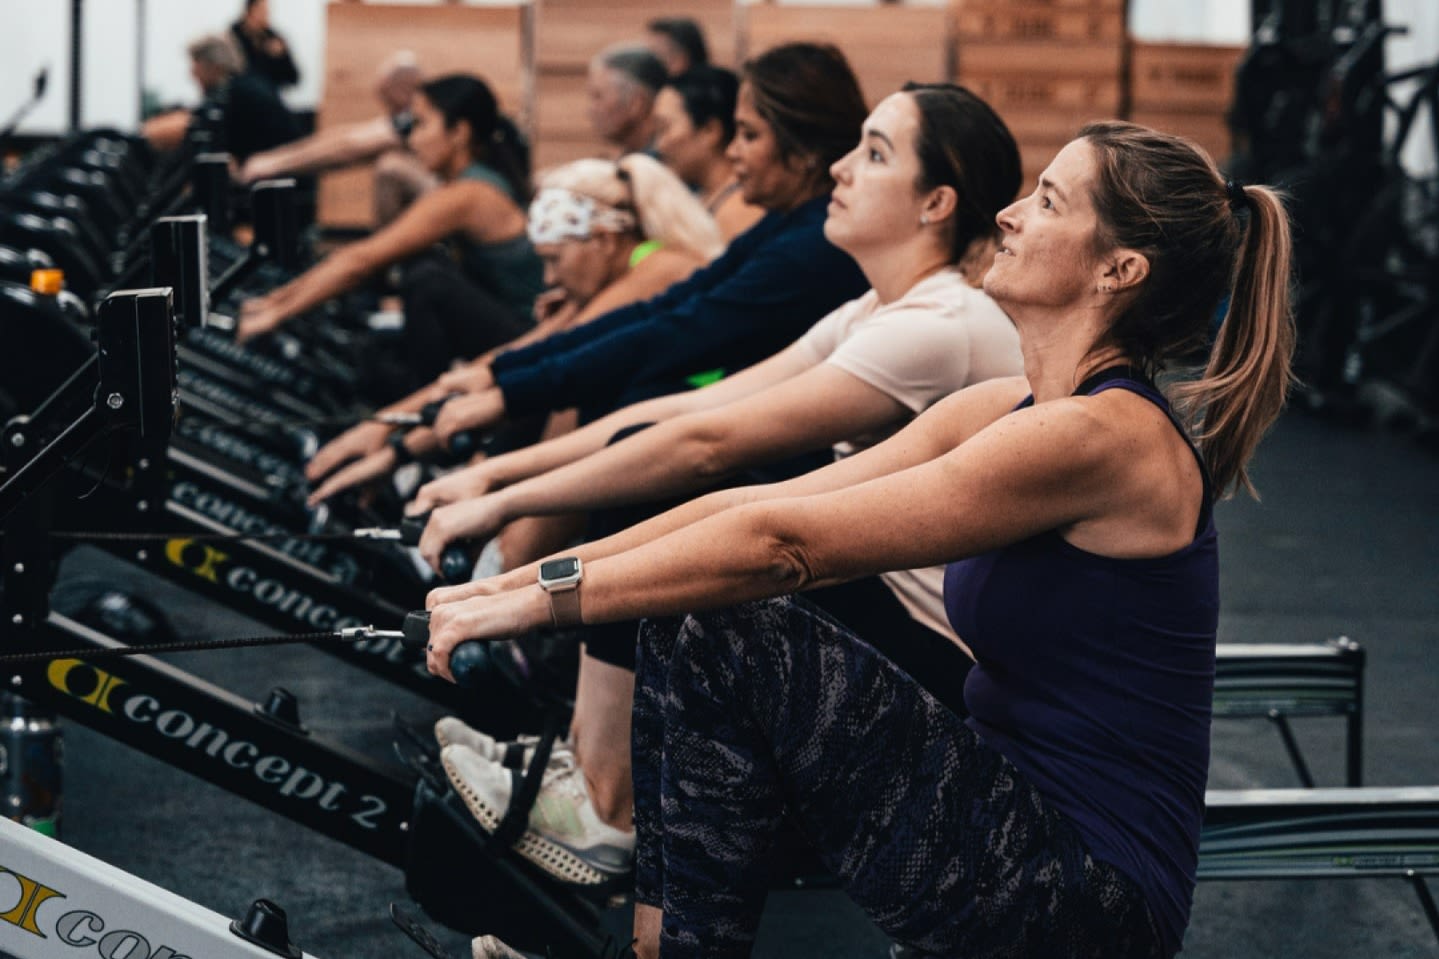 Alpha Athletics: Read Reviews and Book Classes on ClassPass